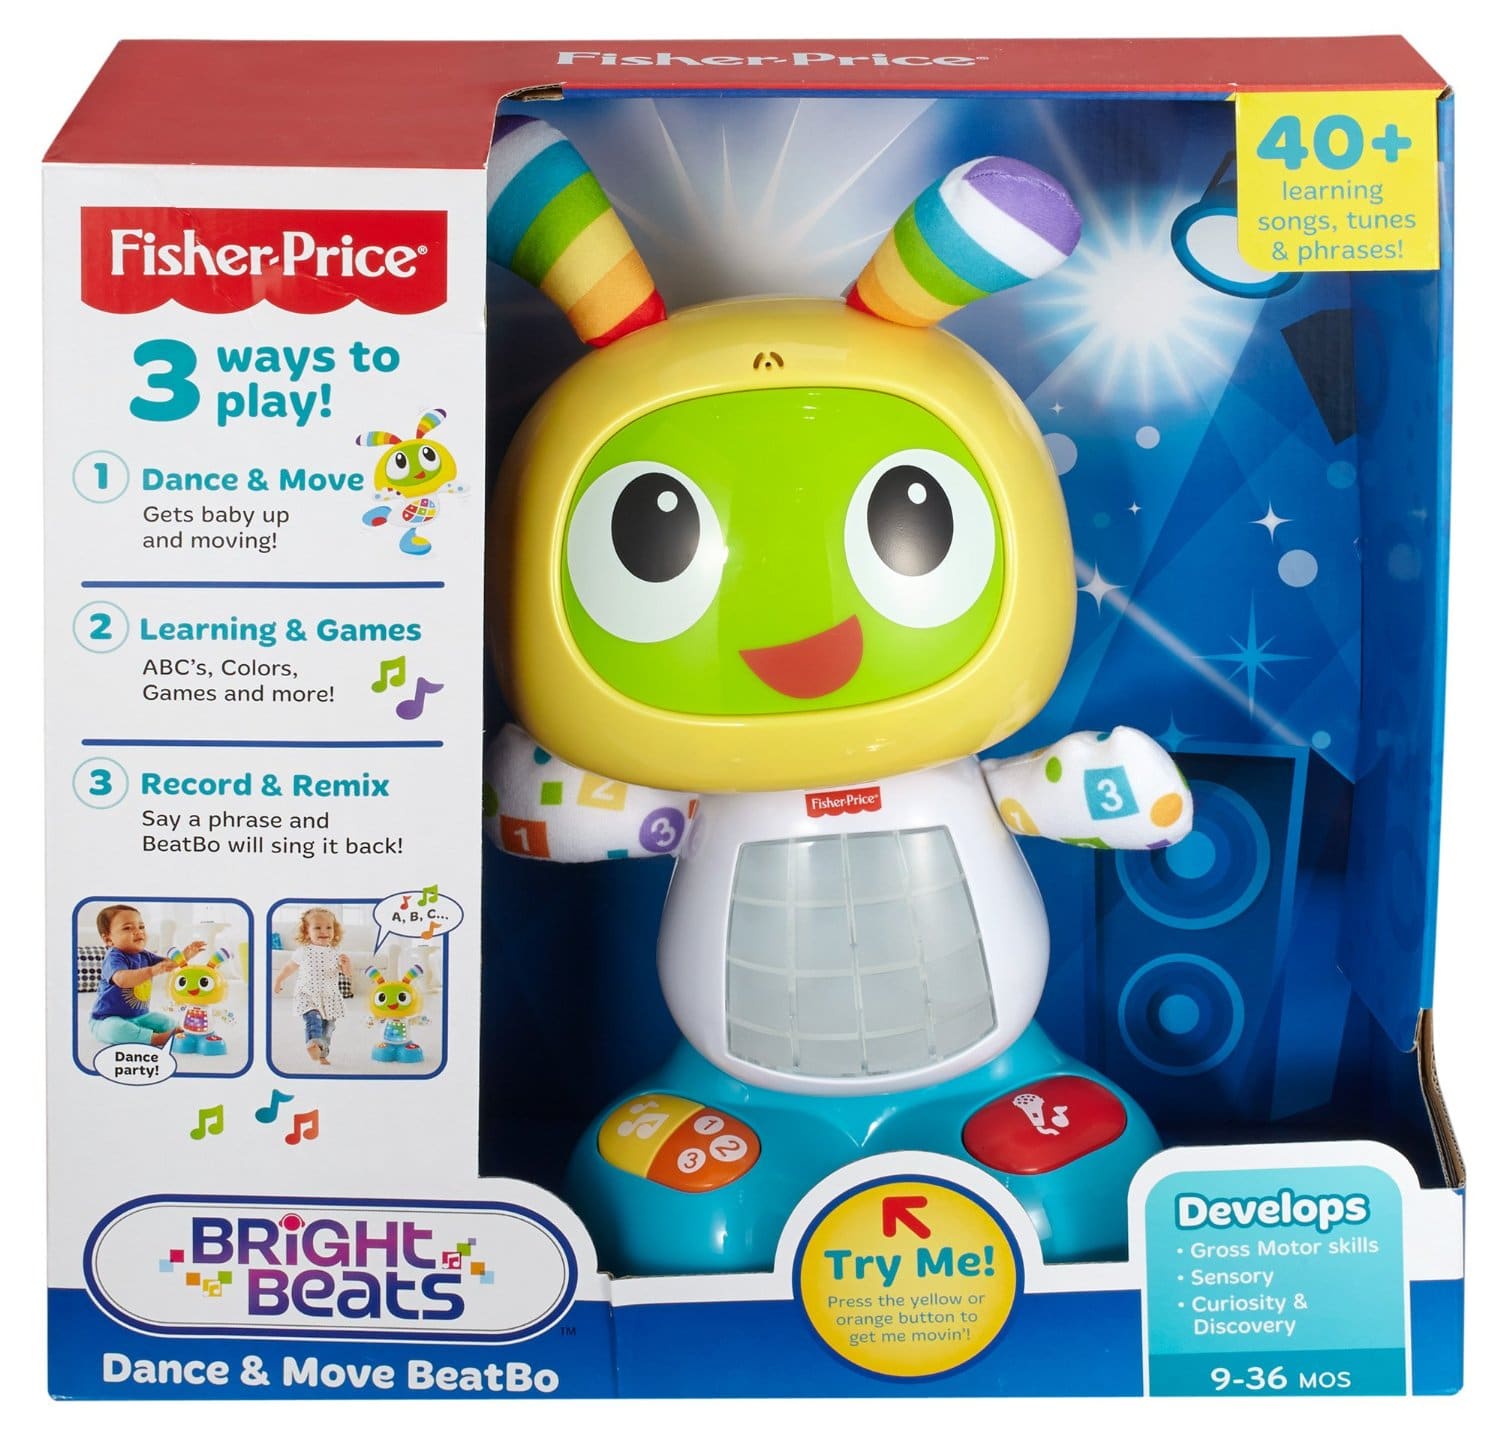 FisherPrice Bright Beats Dance and Move Review